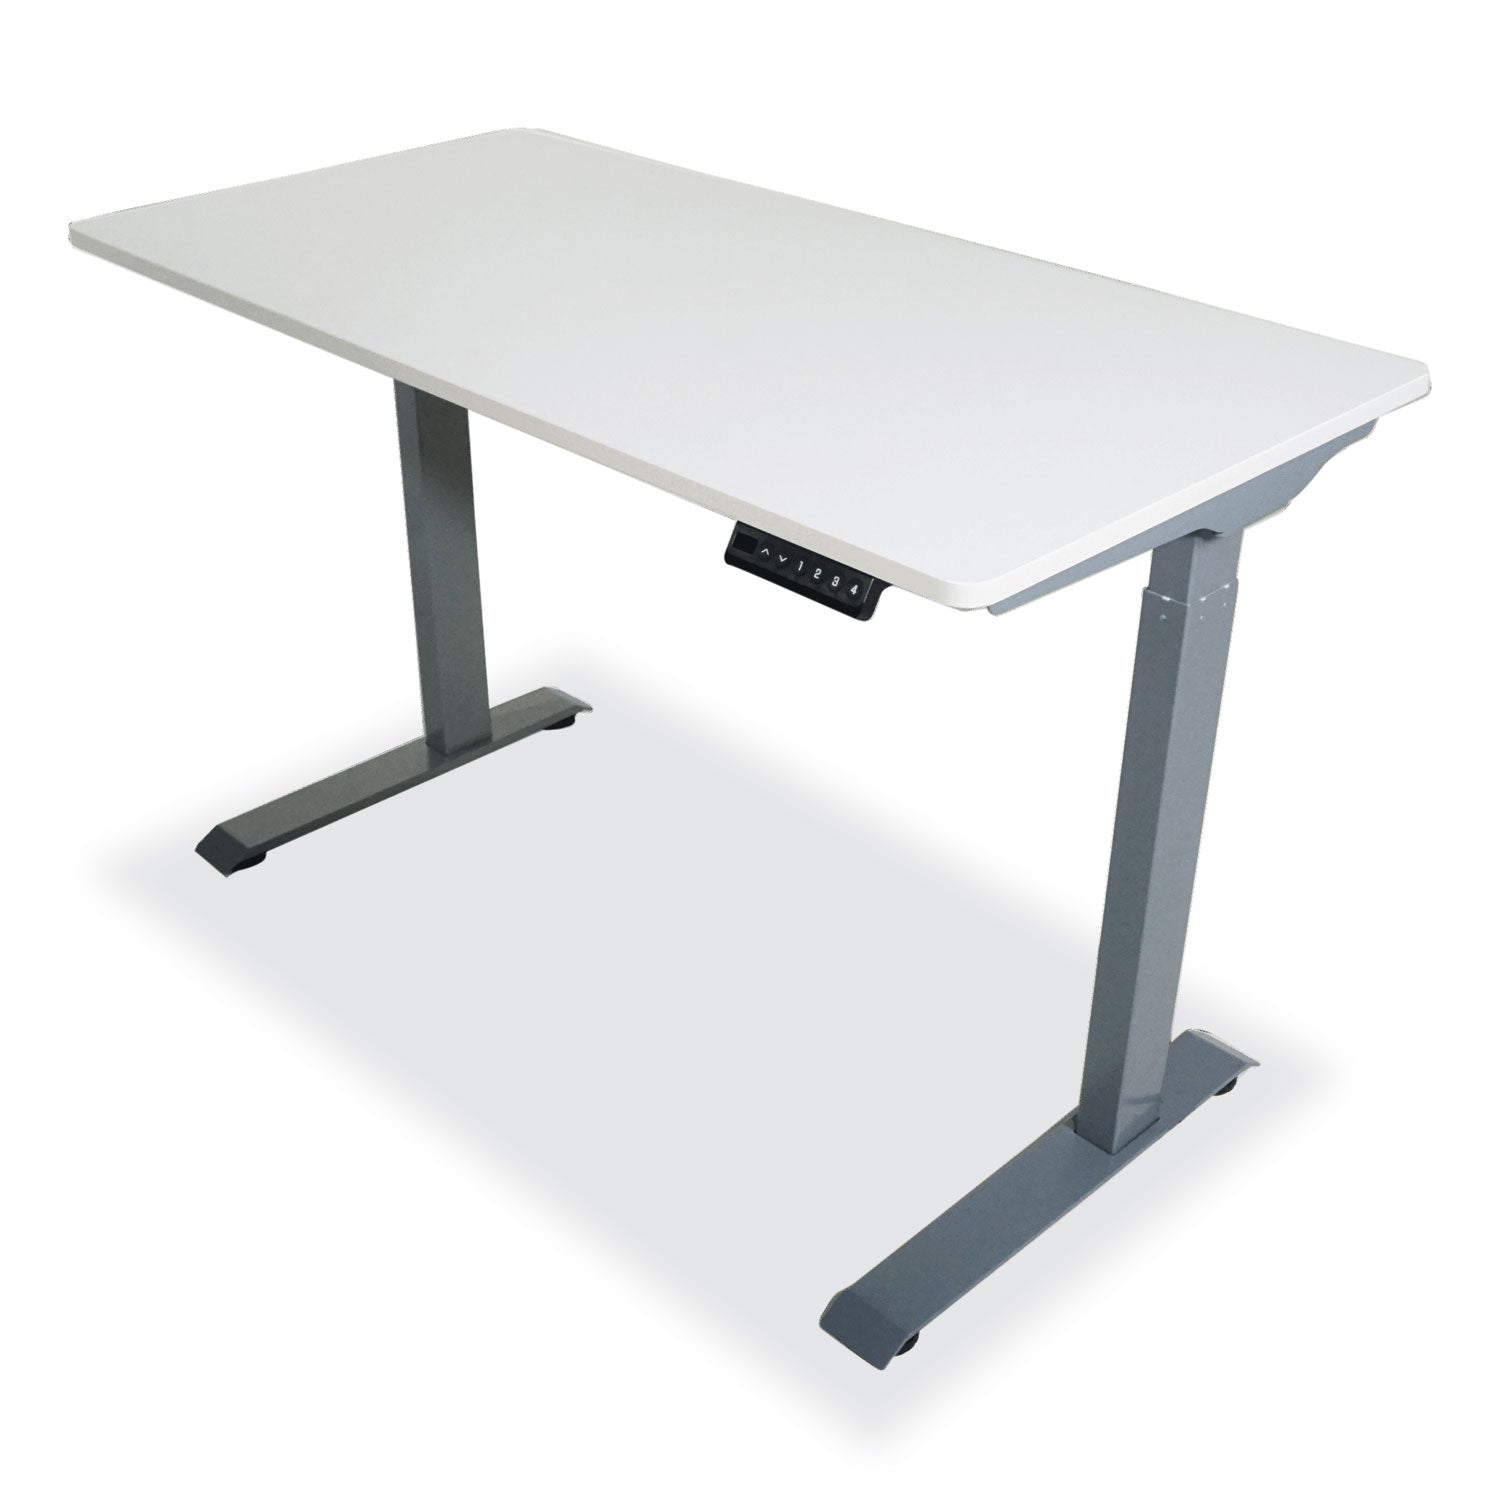 electric-height-adjustable-standing-desk-48-x-236-x-287-to-484-white-ships-in-1-3-business-days_vctdc840w - 1